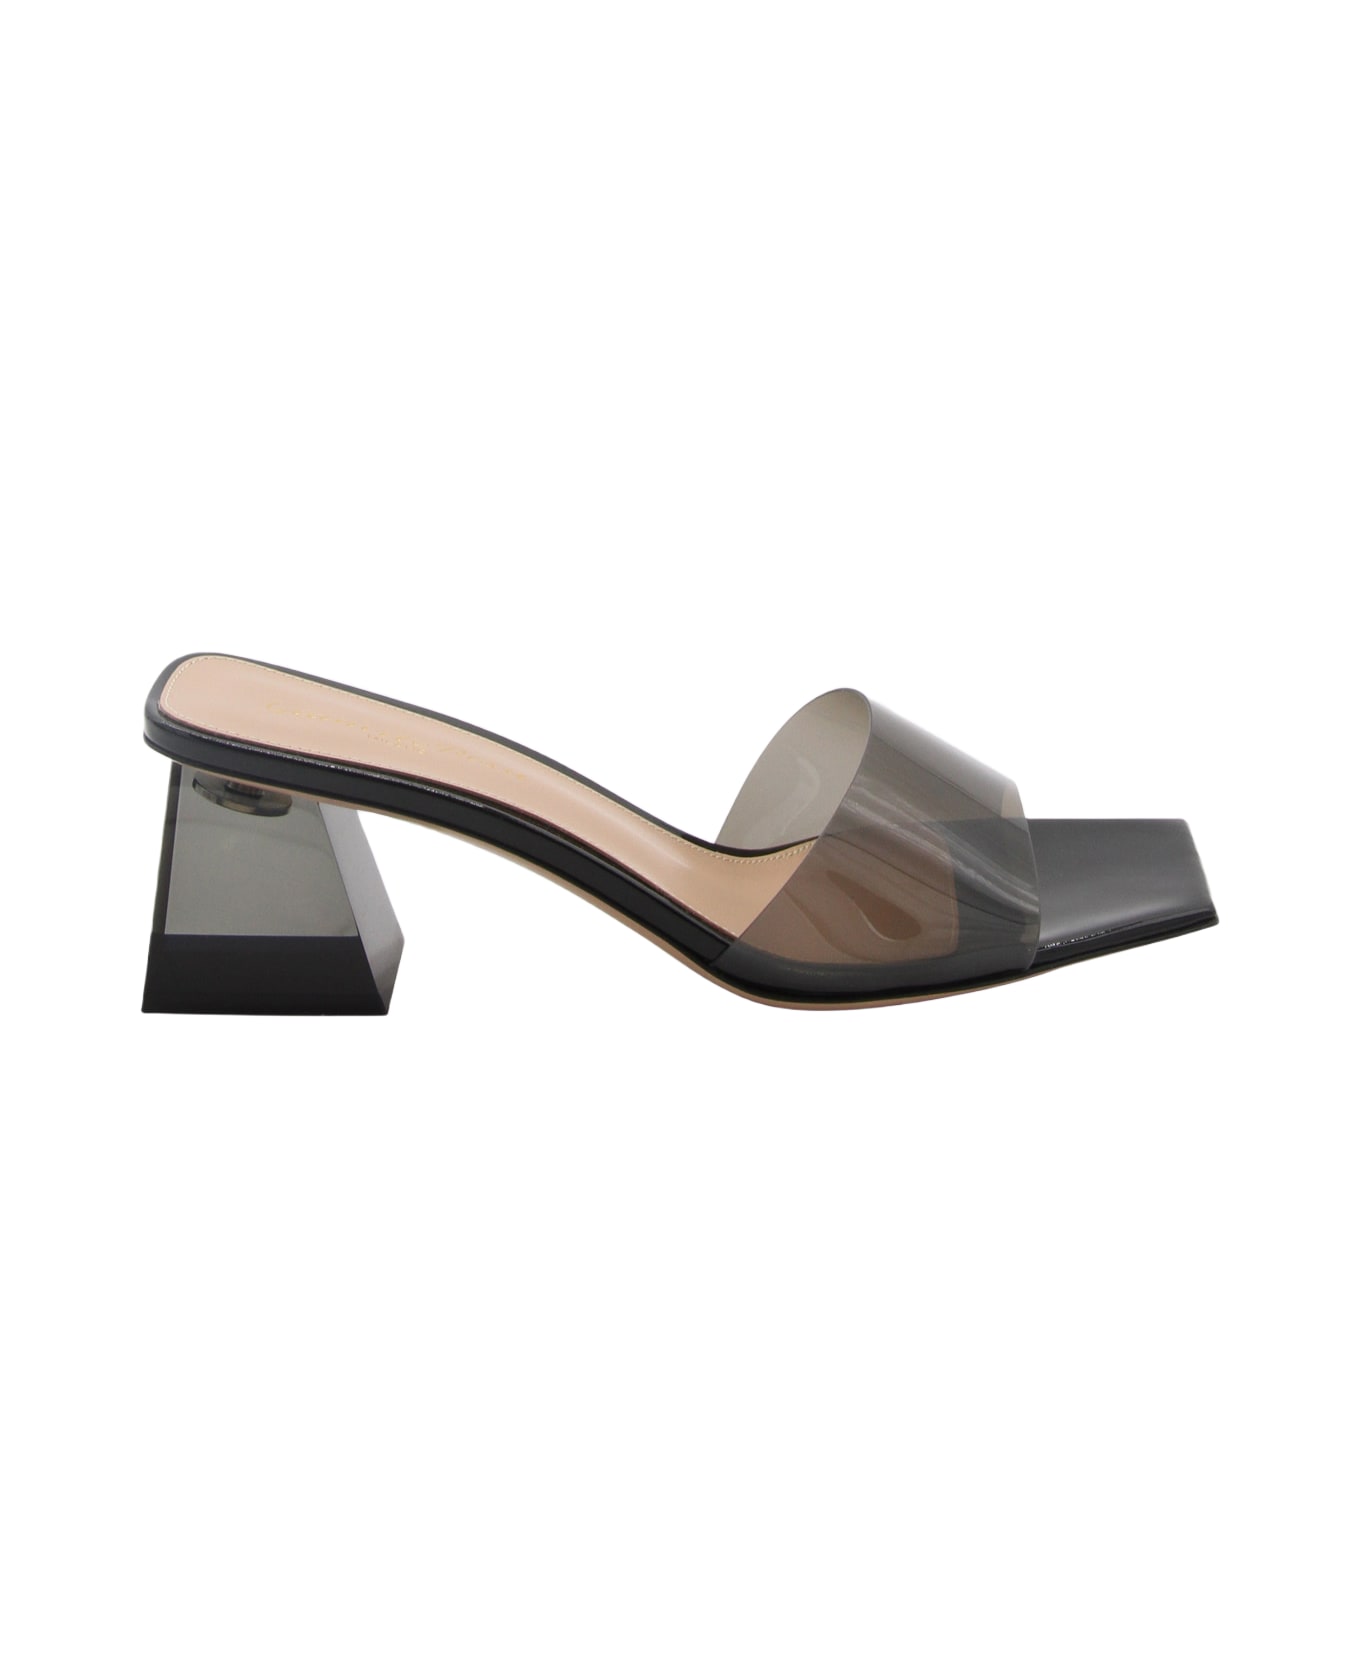 Gianvito Rossi Fume And Black Pvc And Leather Cosmic Sandals - FUME''+BLACK サンダル